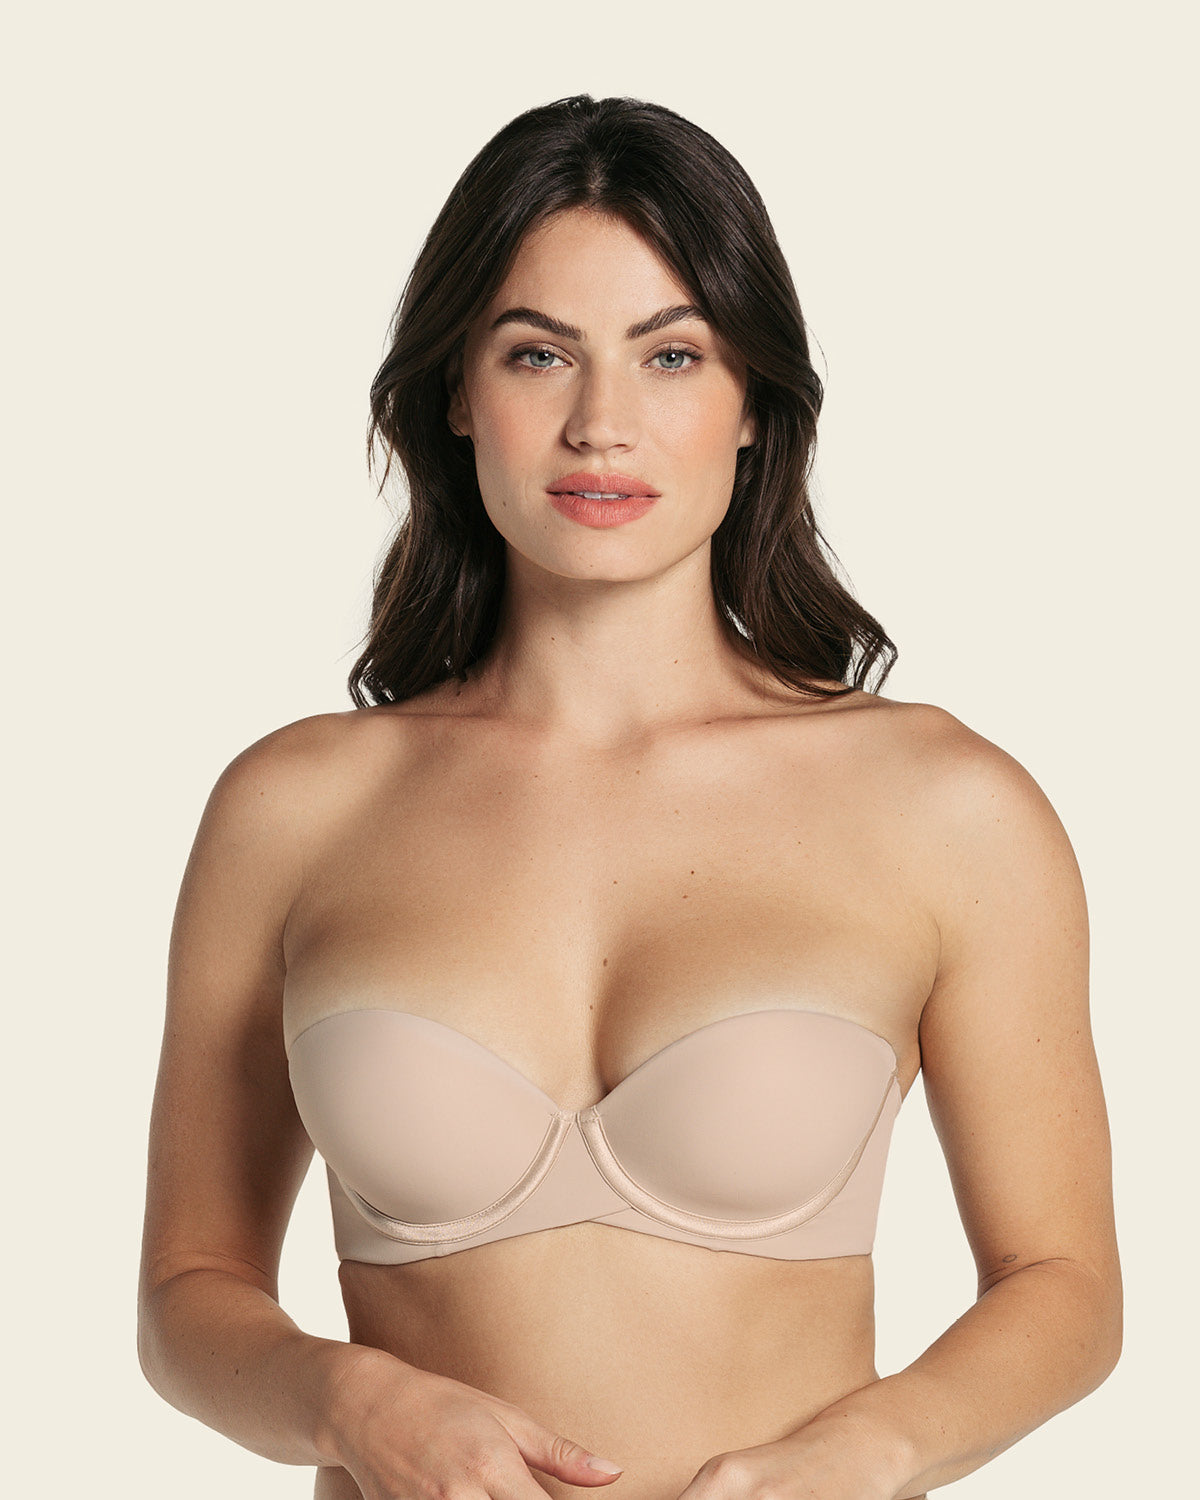 Memory Foam Push-Up Underwire Bustier Bra with Strappy Front